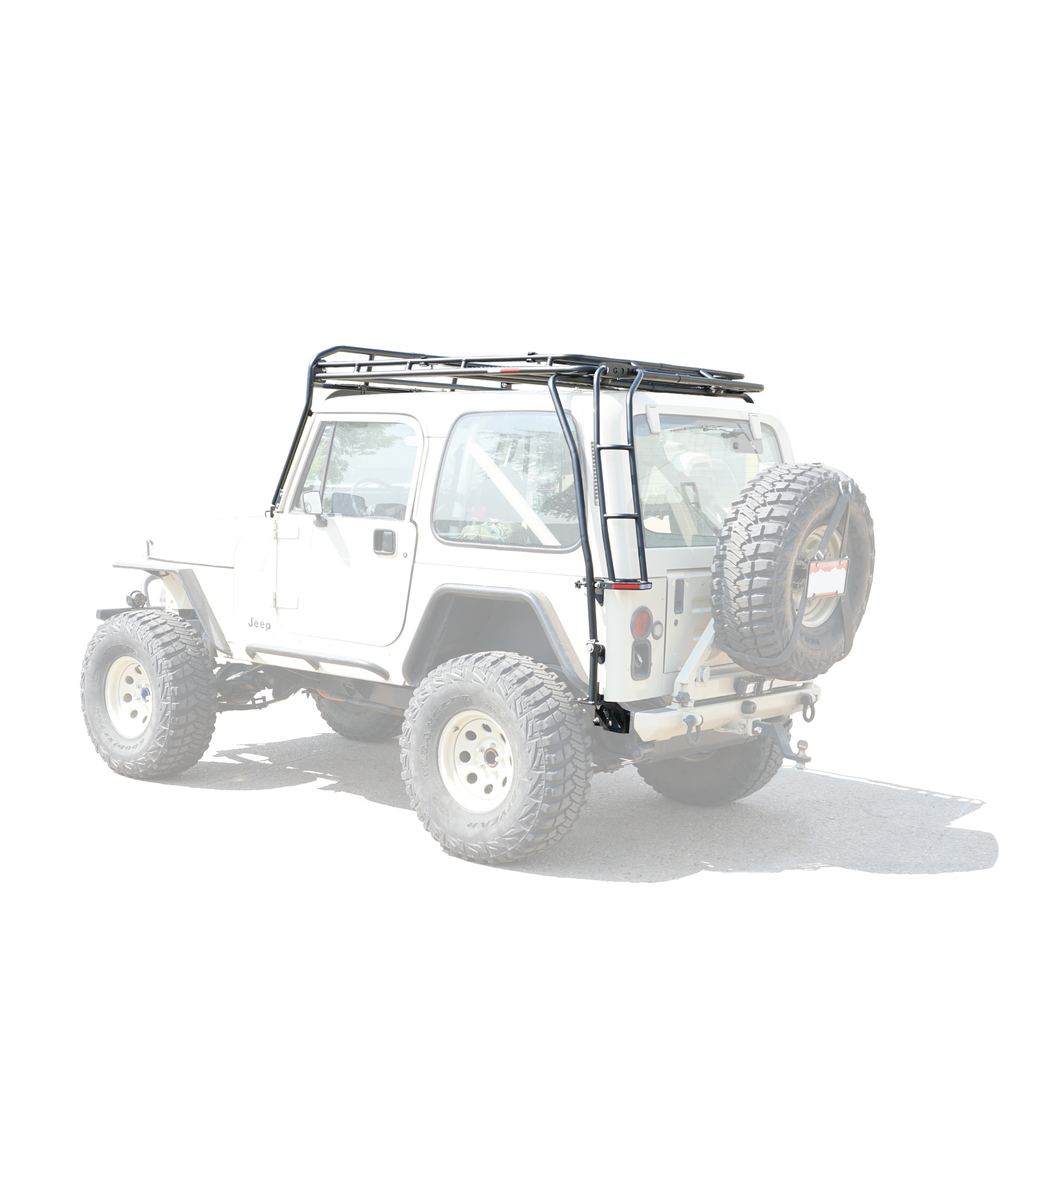 1 Piece Removable Hardtop For Jeep Wrangler Yj With Half Door Inserts 1986 1995